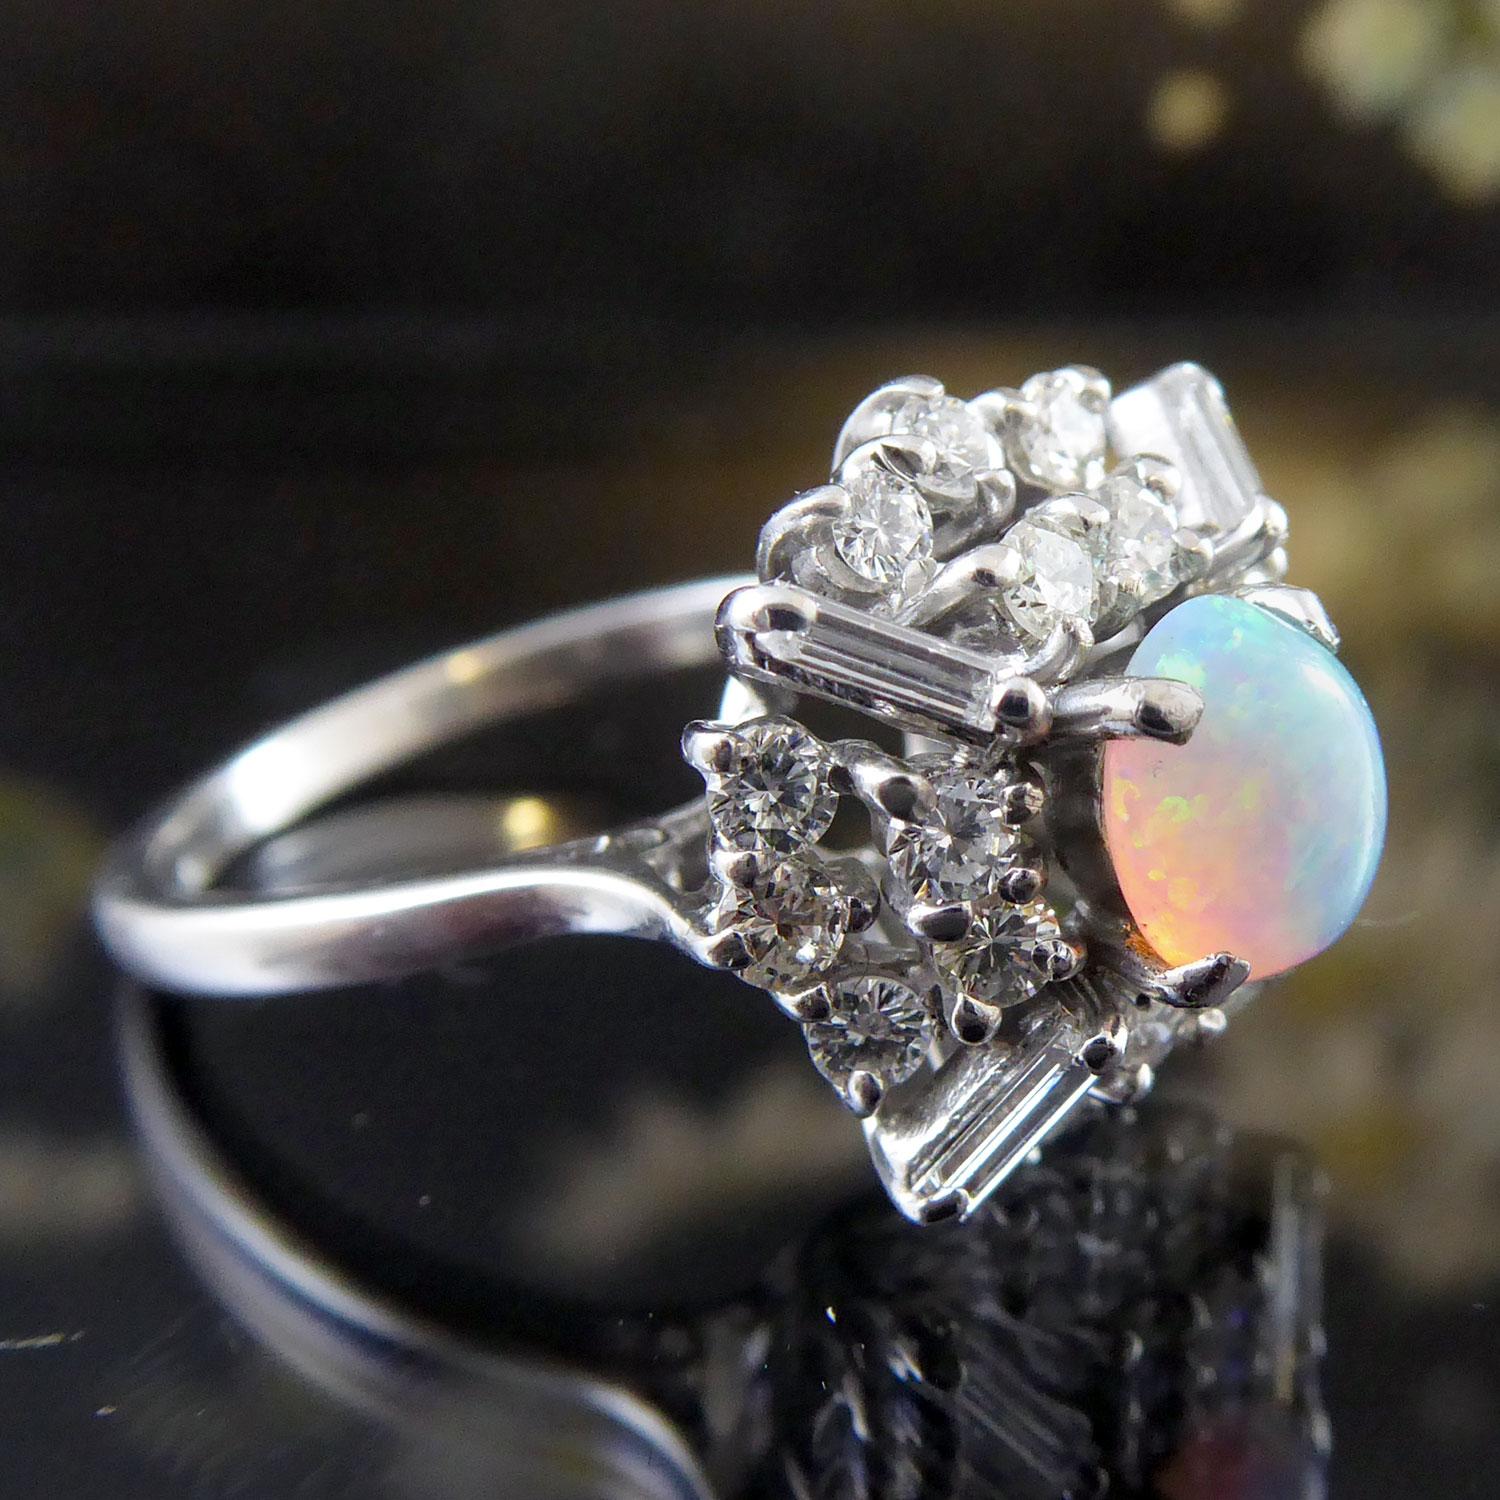 Cabochon Vintage 0.64 Carat Opal and Diamond Cluster Ring, White Gold, Mid-20th Century